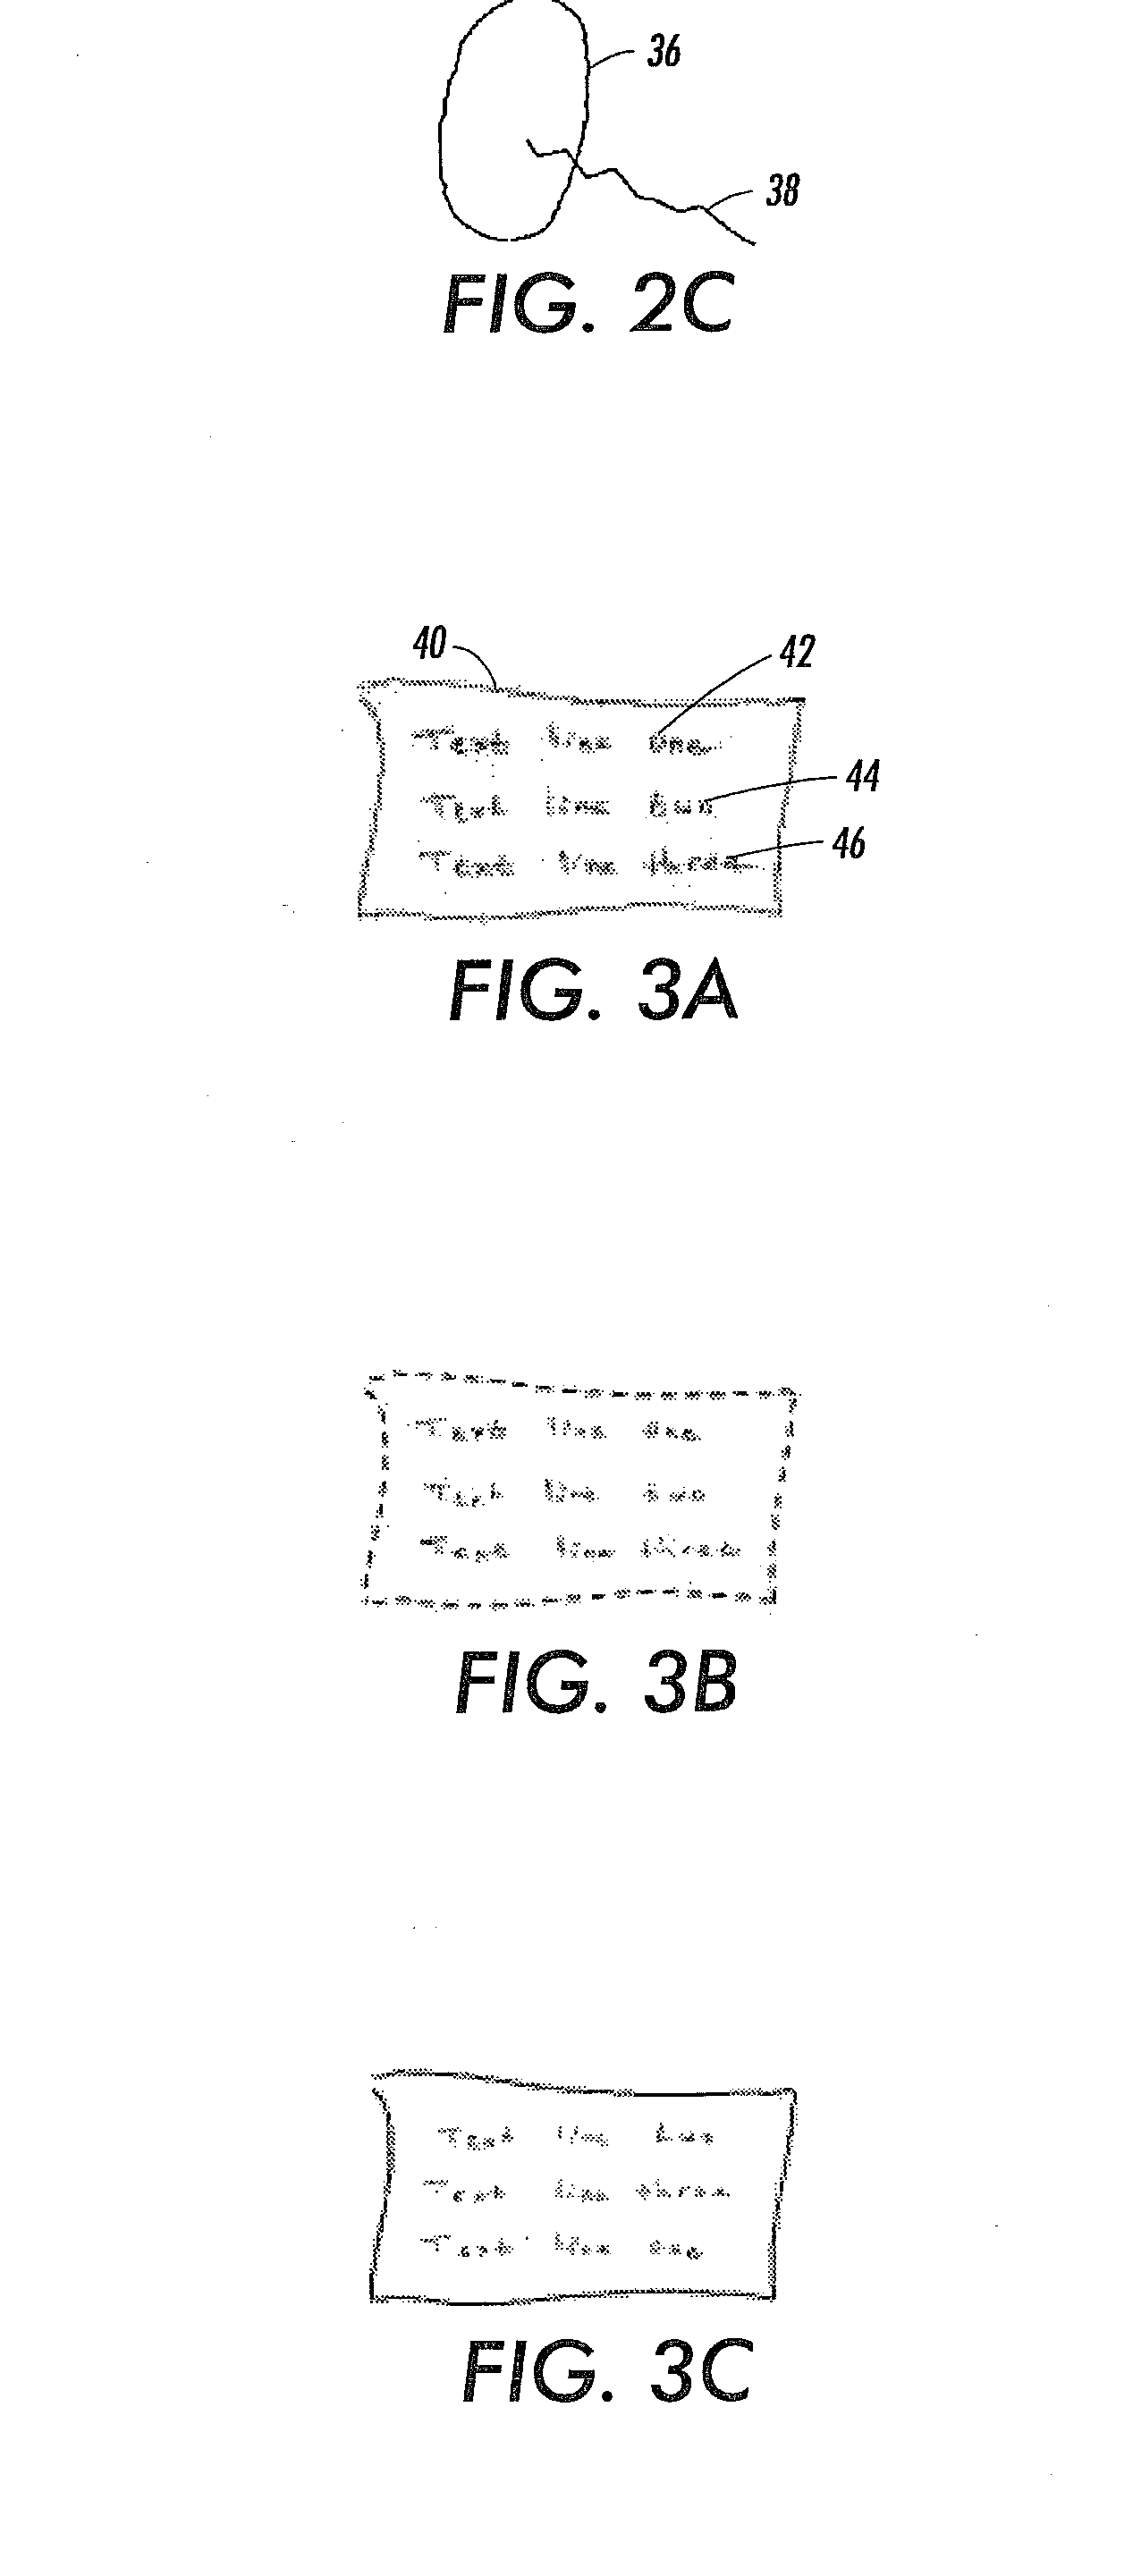 Method and apparatus to convert digital ink images for use in a structured text/graphics editor